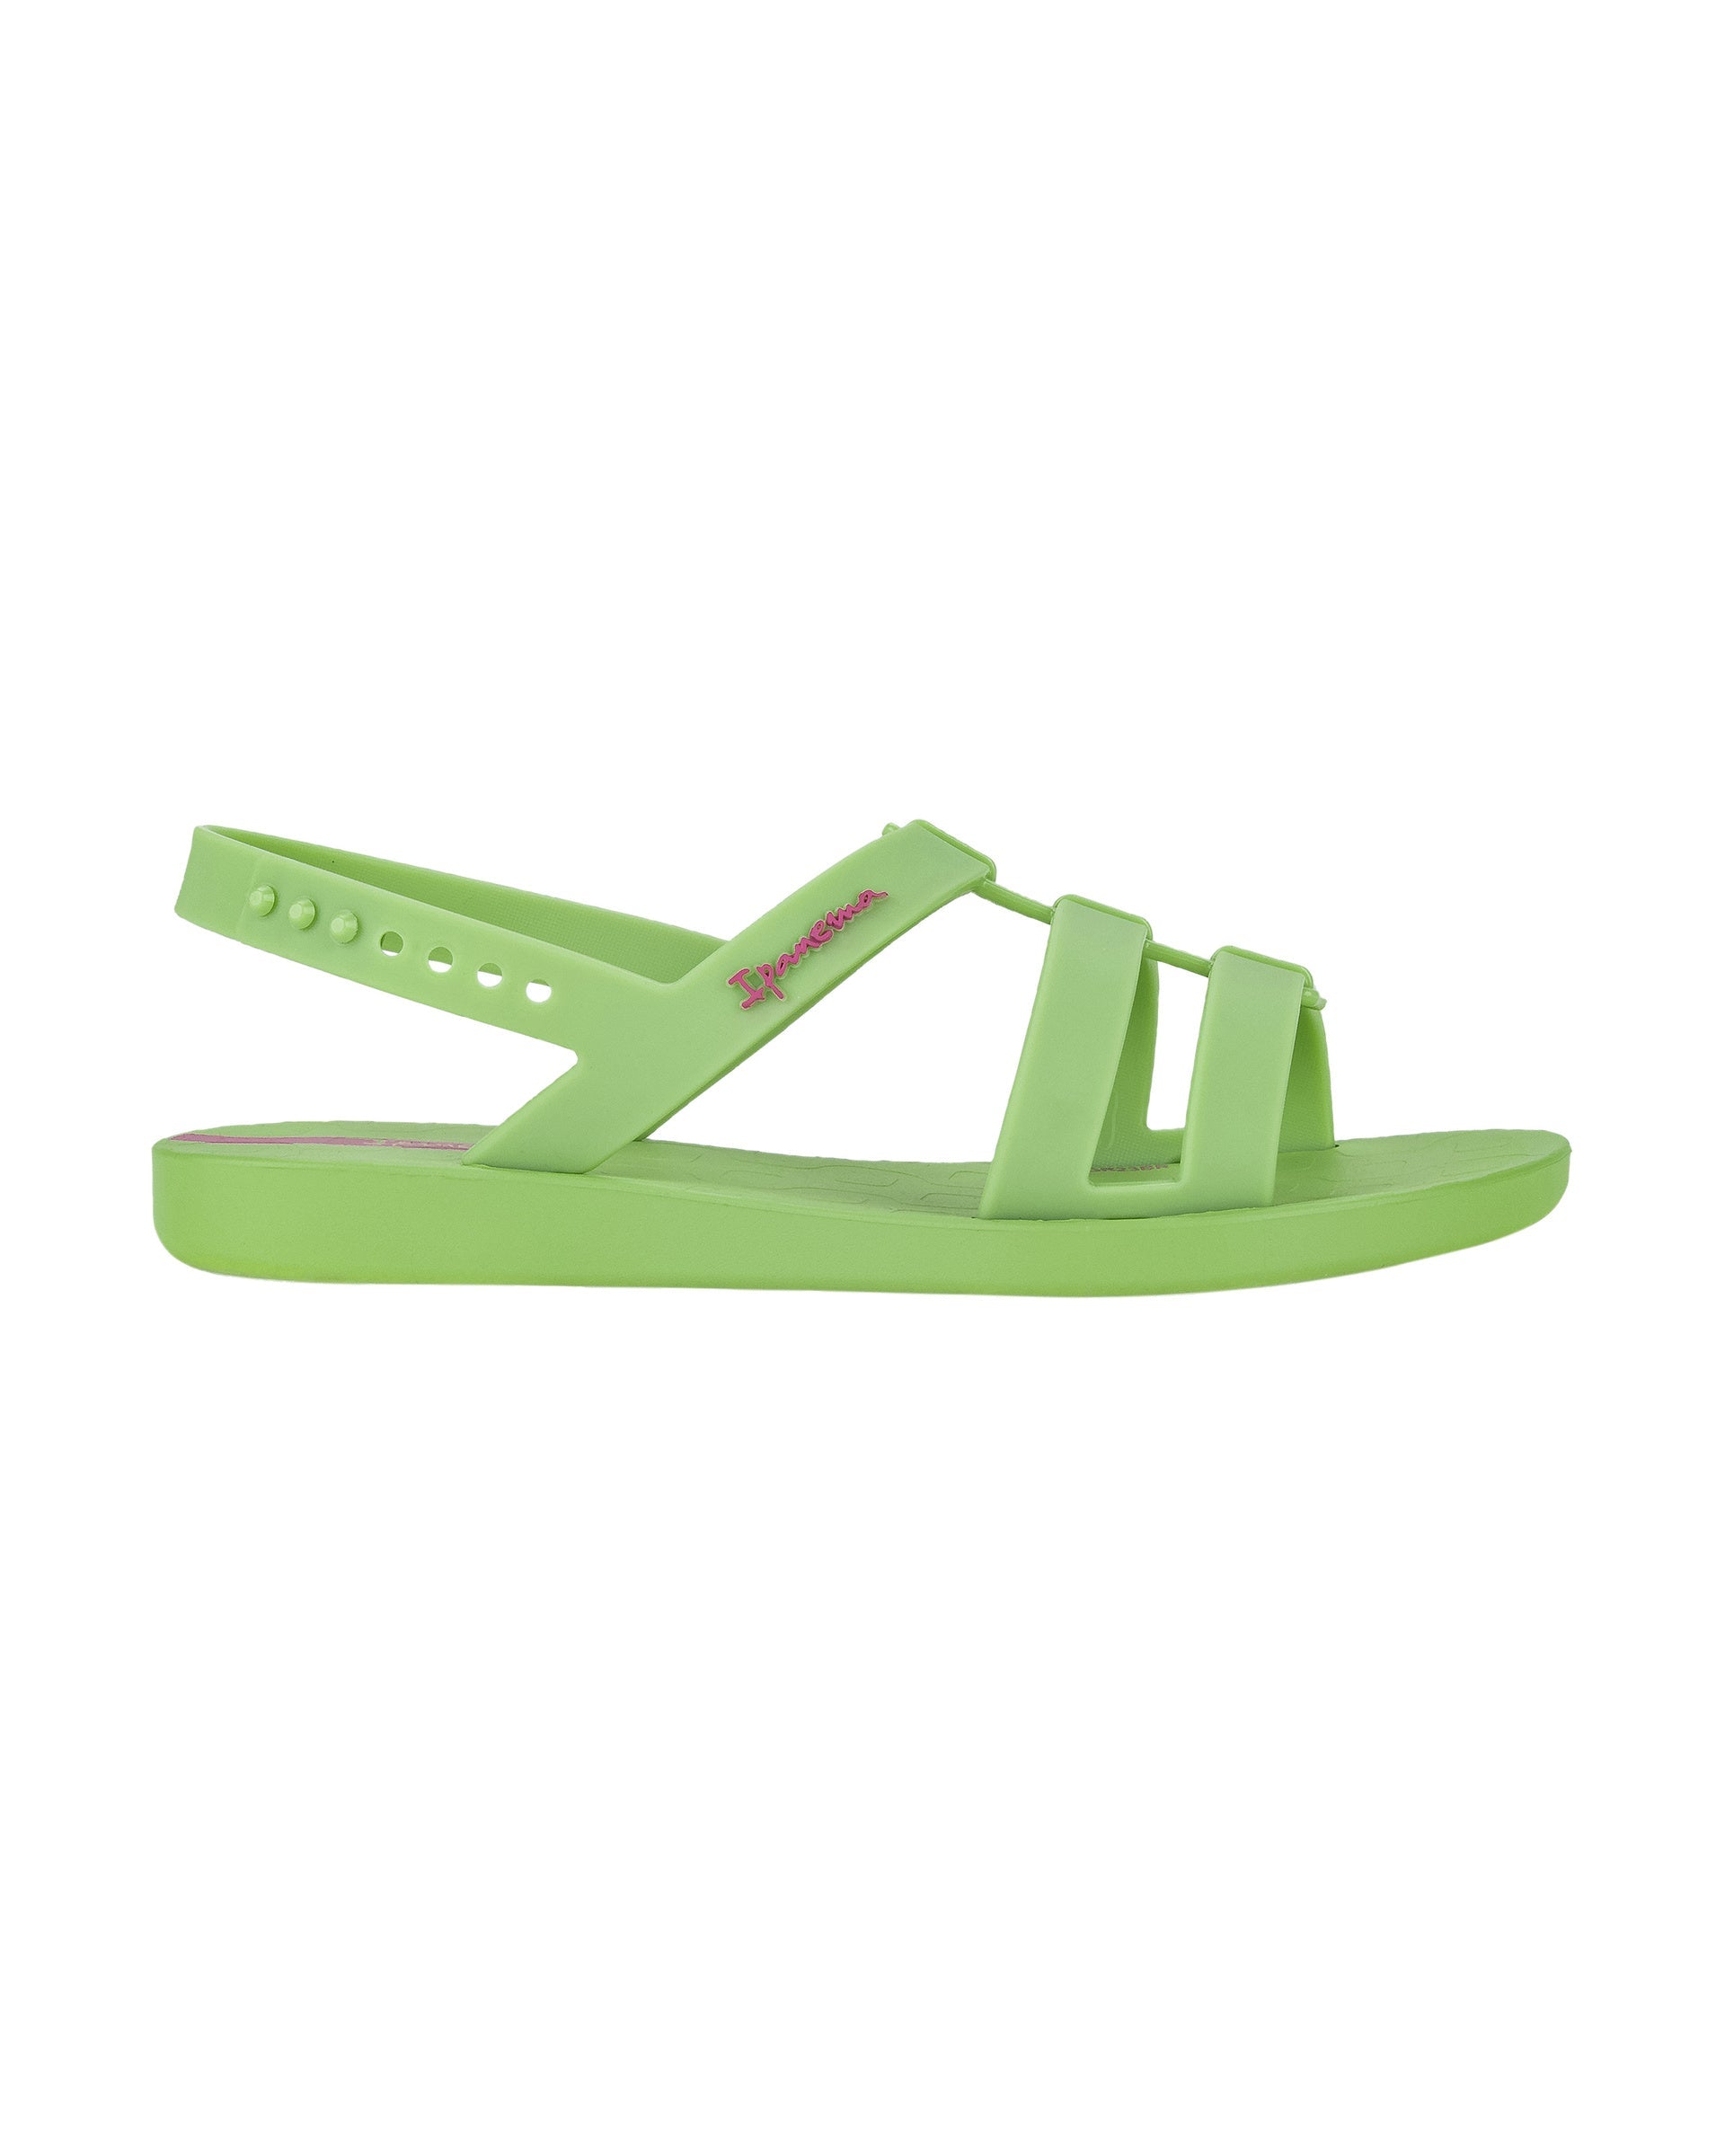 Outer side view of a green Ipanema Class Go women's sandal.